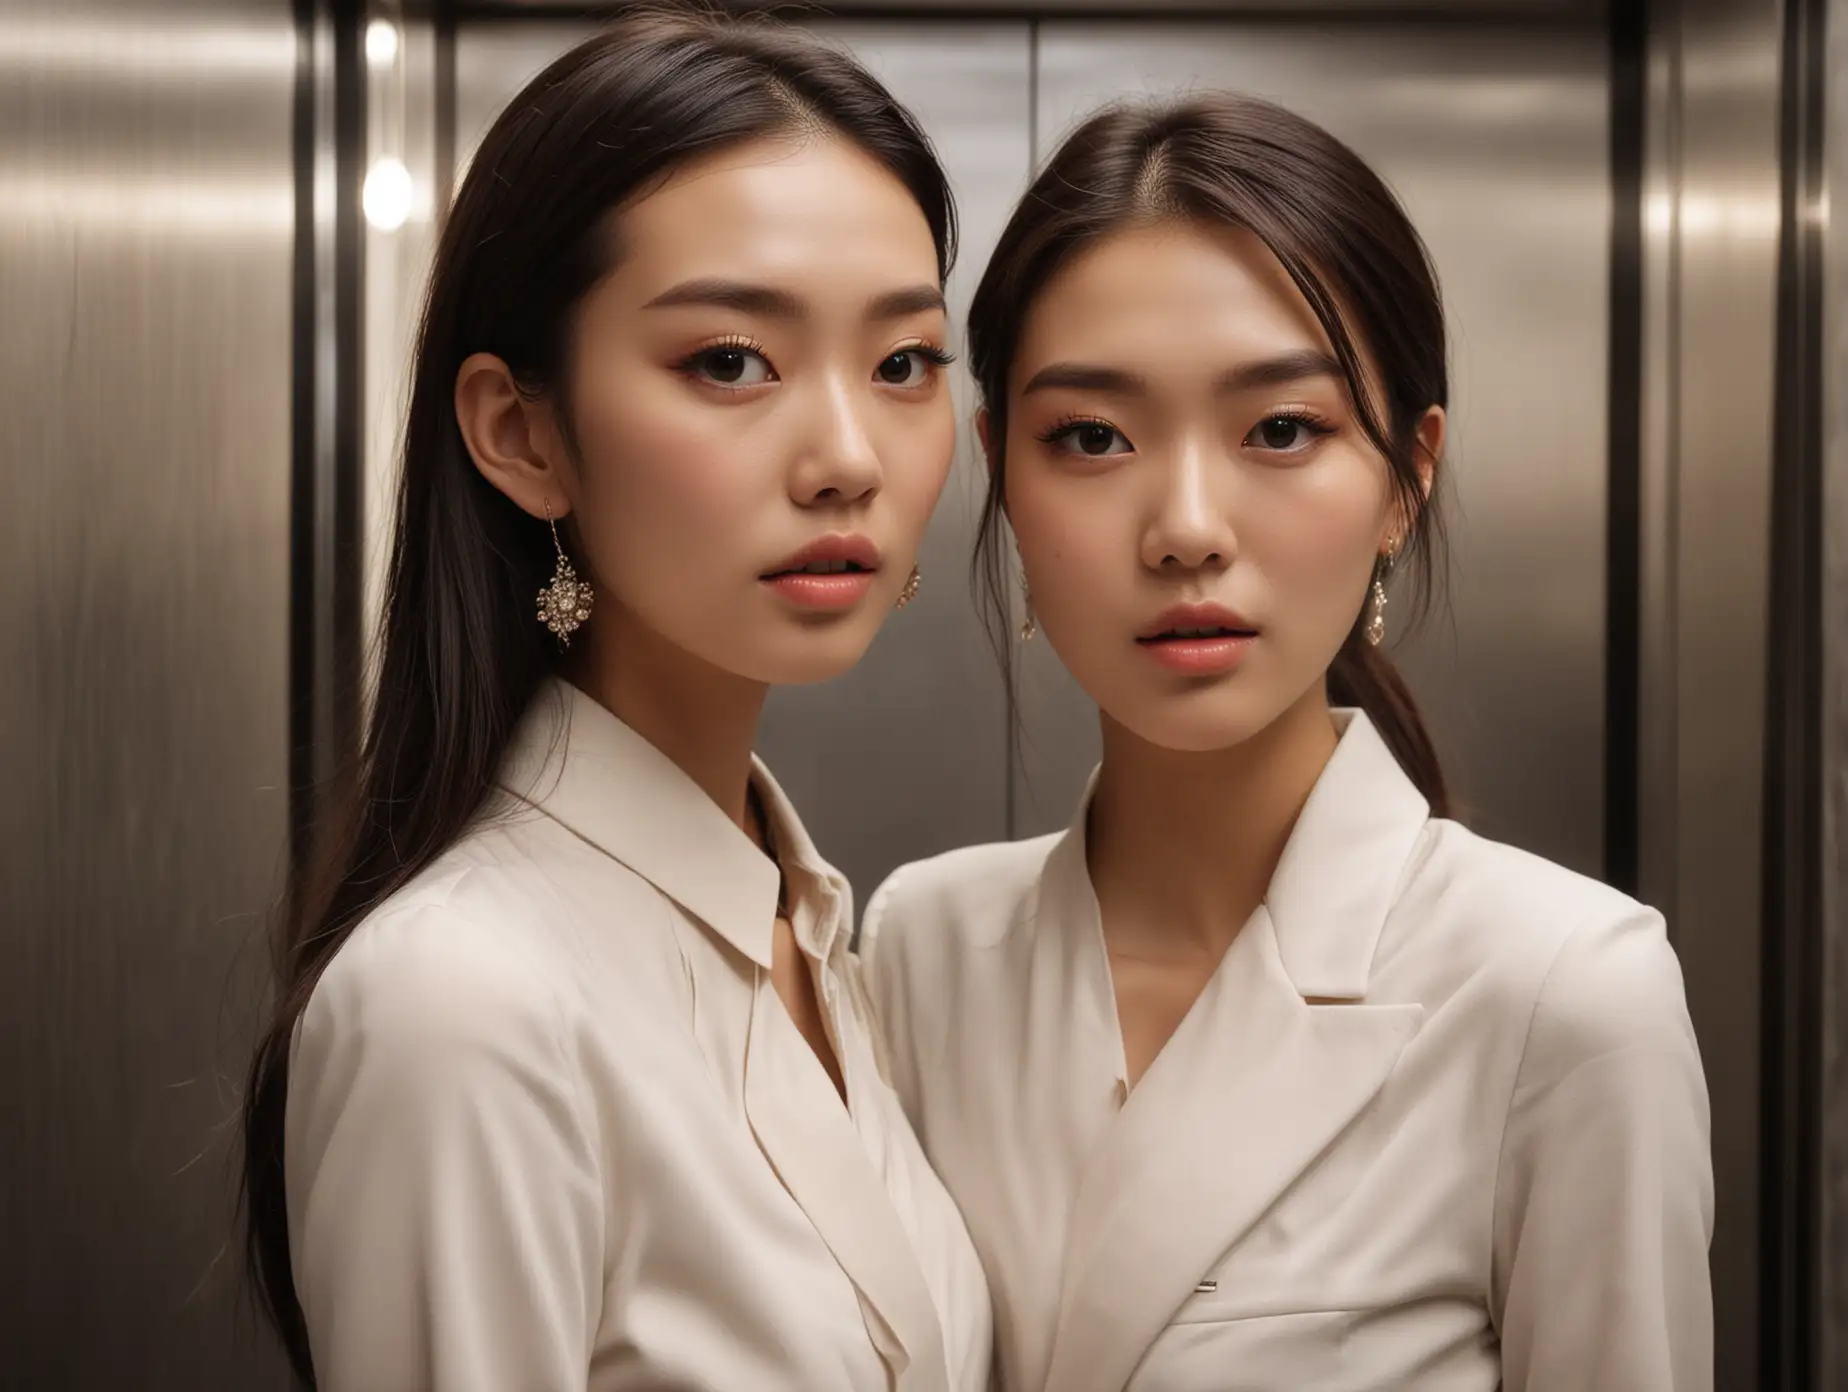 Close up of two faces of willowy shanghai fashion models blushing and staring at the camera in stunned amazement and wonder in the elevator of a fancy office building.